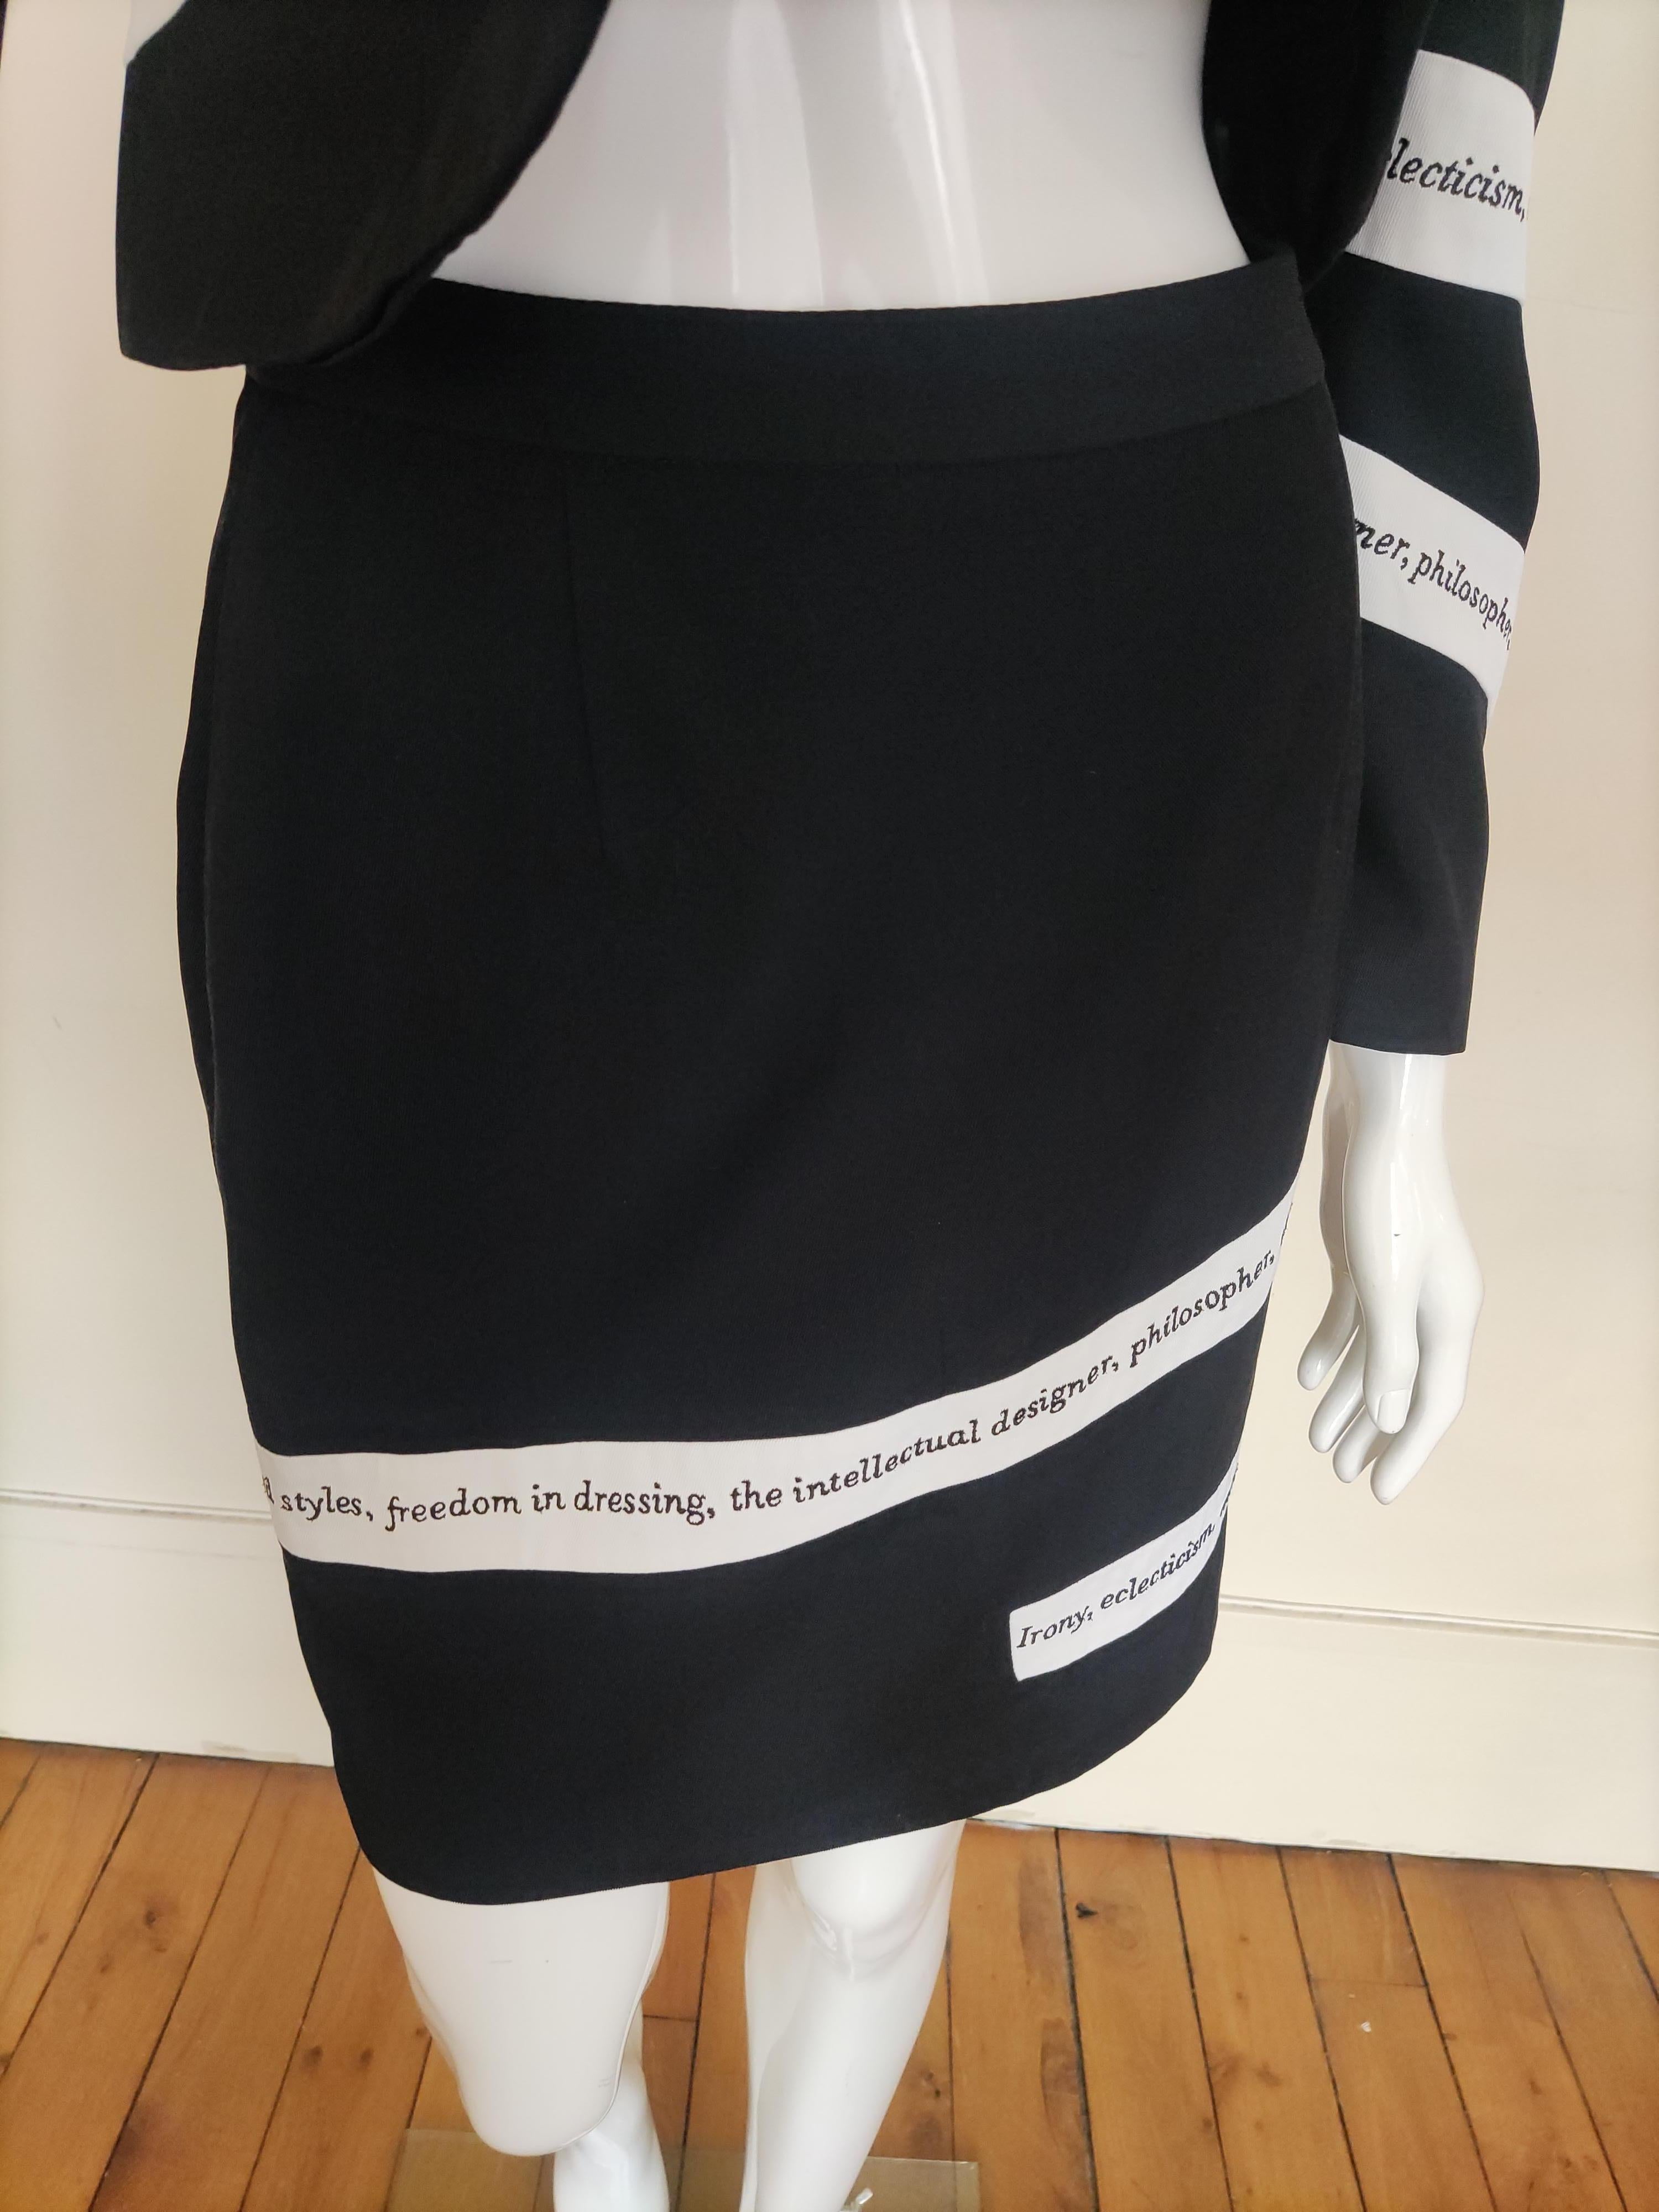 Moschino Cheap and Chic Ironies Text Tape Vintage Couture Black White Dress Suit en vente 10